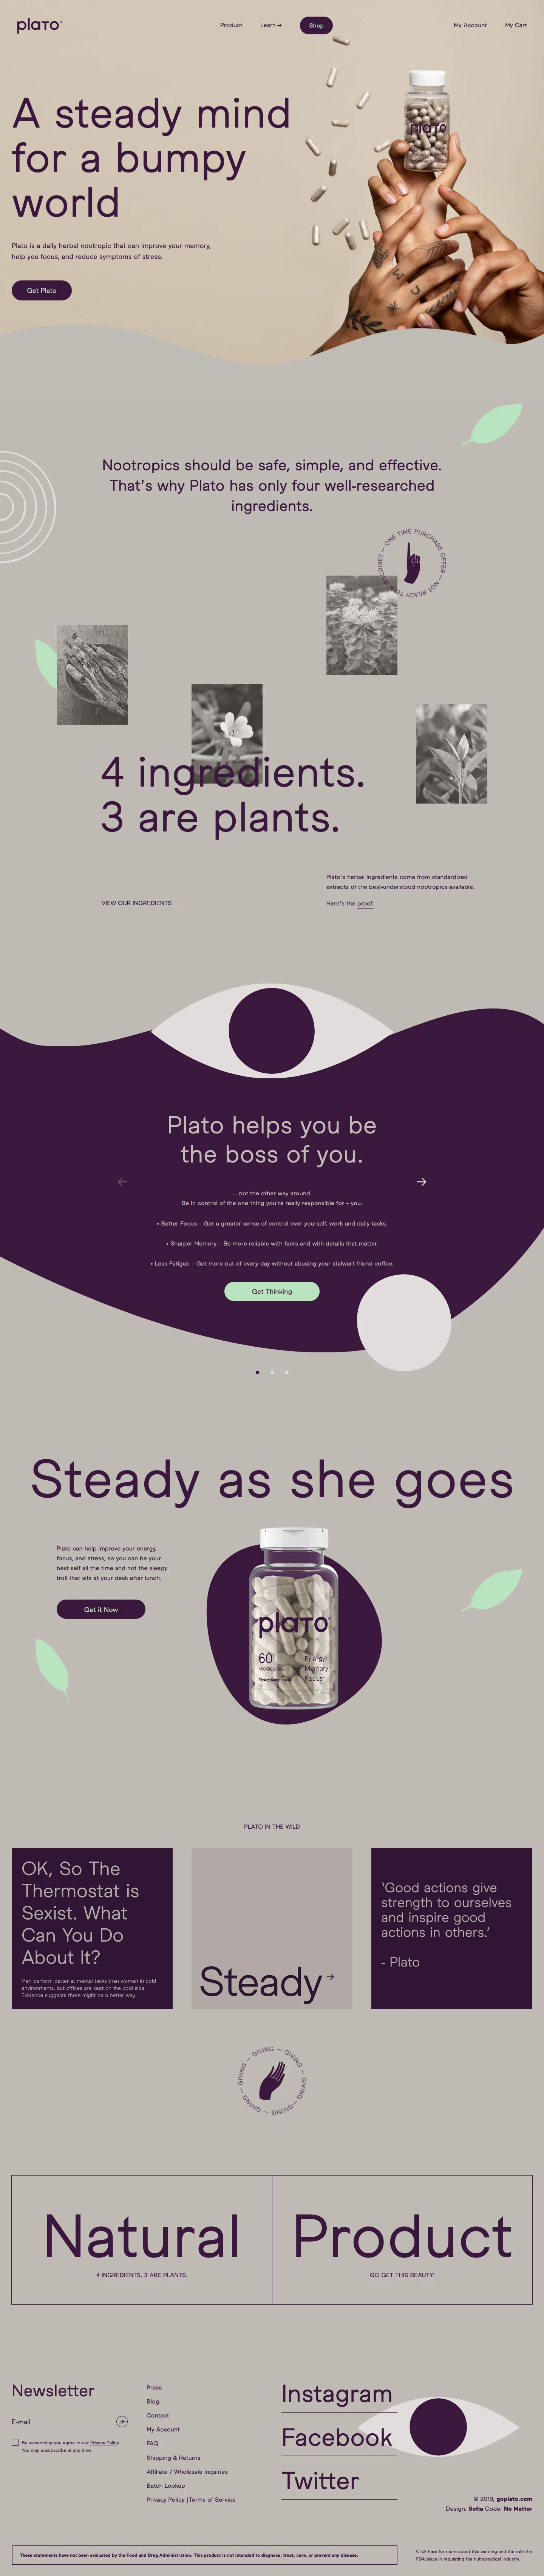 Plato Landing Page Example: Plato is a daily herbal nootropic that can improve your memory, help you focus, and reduce symptoms of stress.